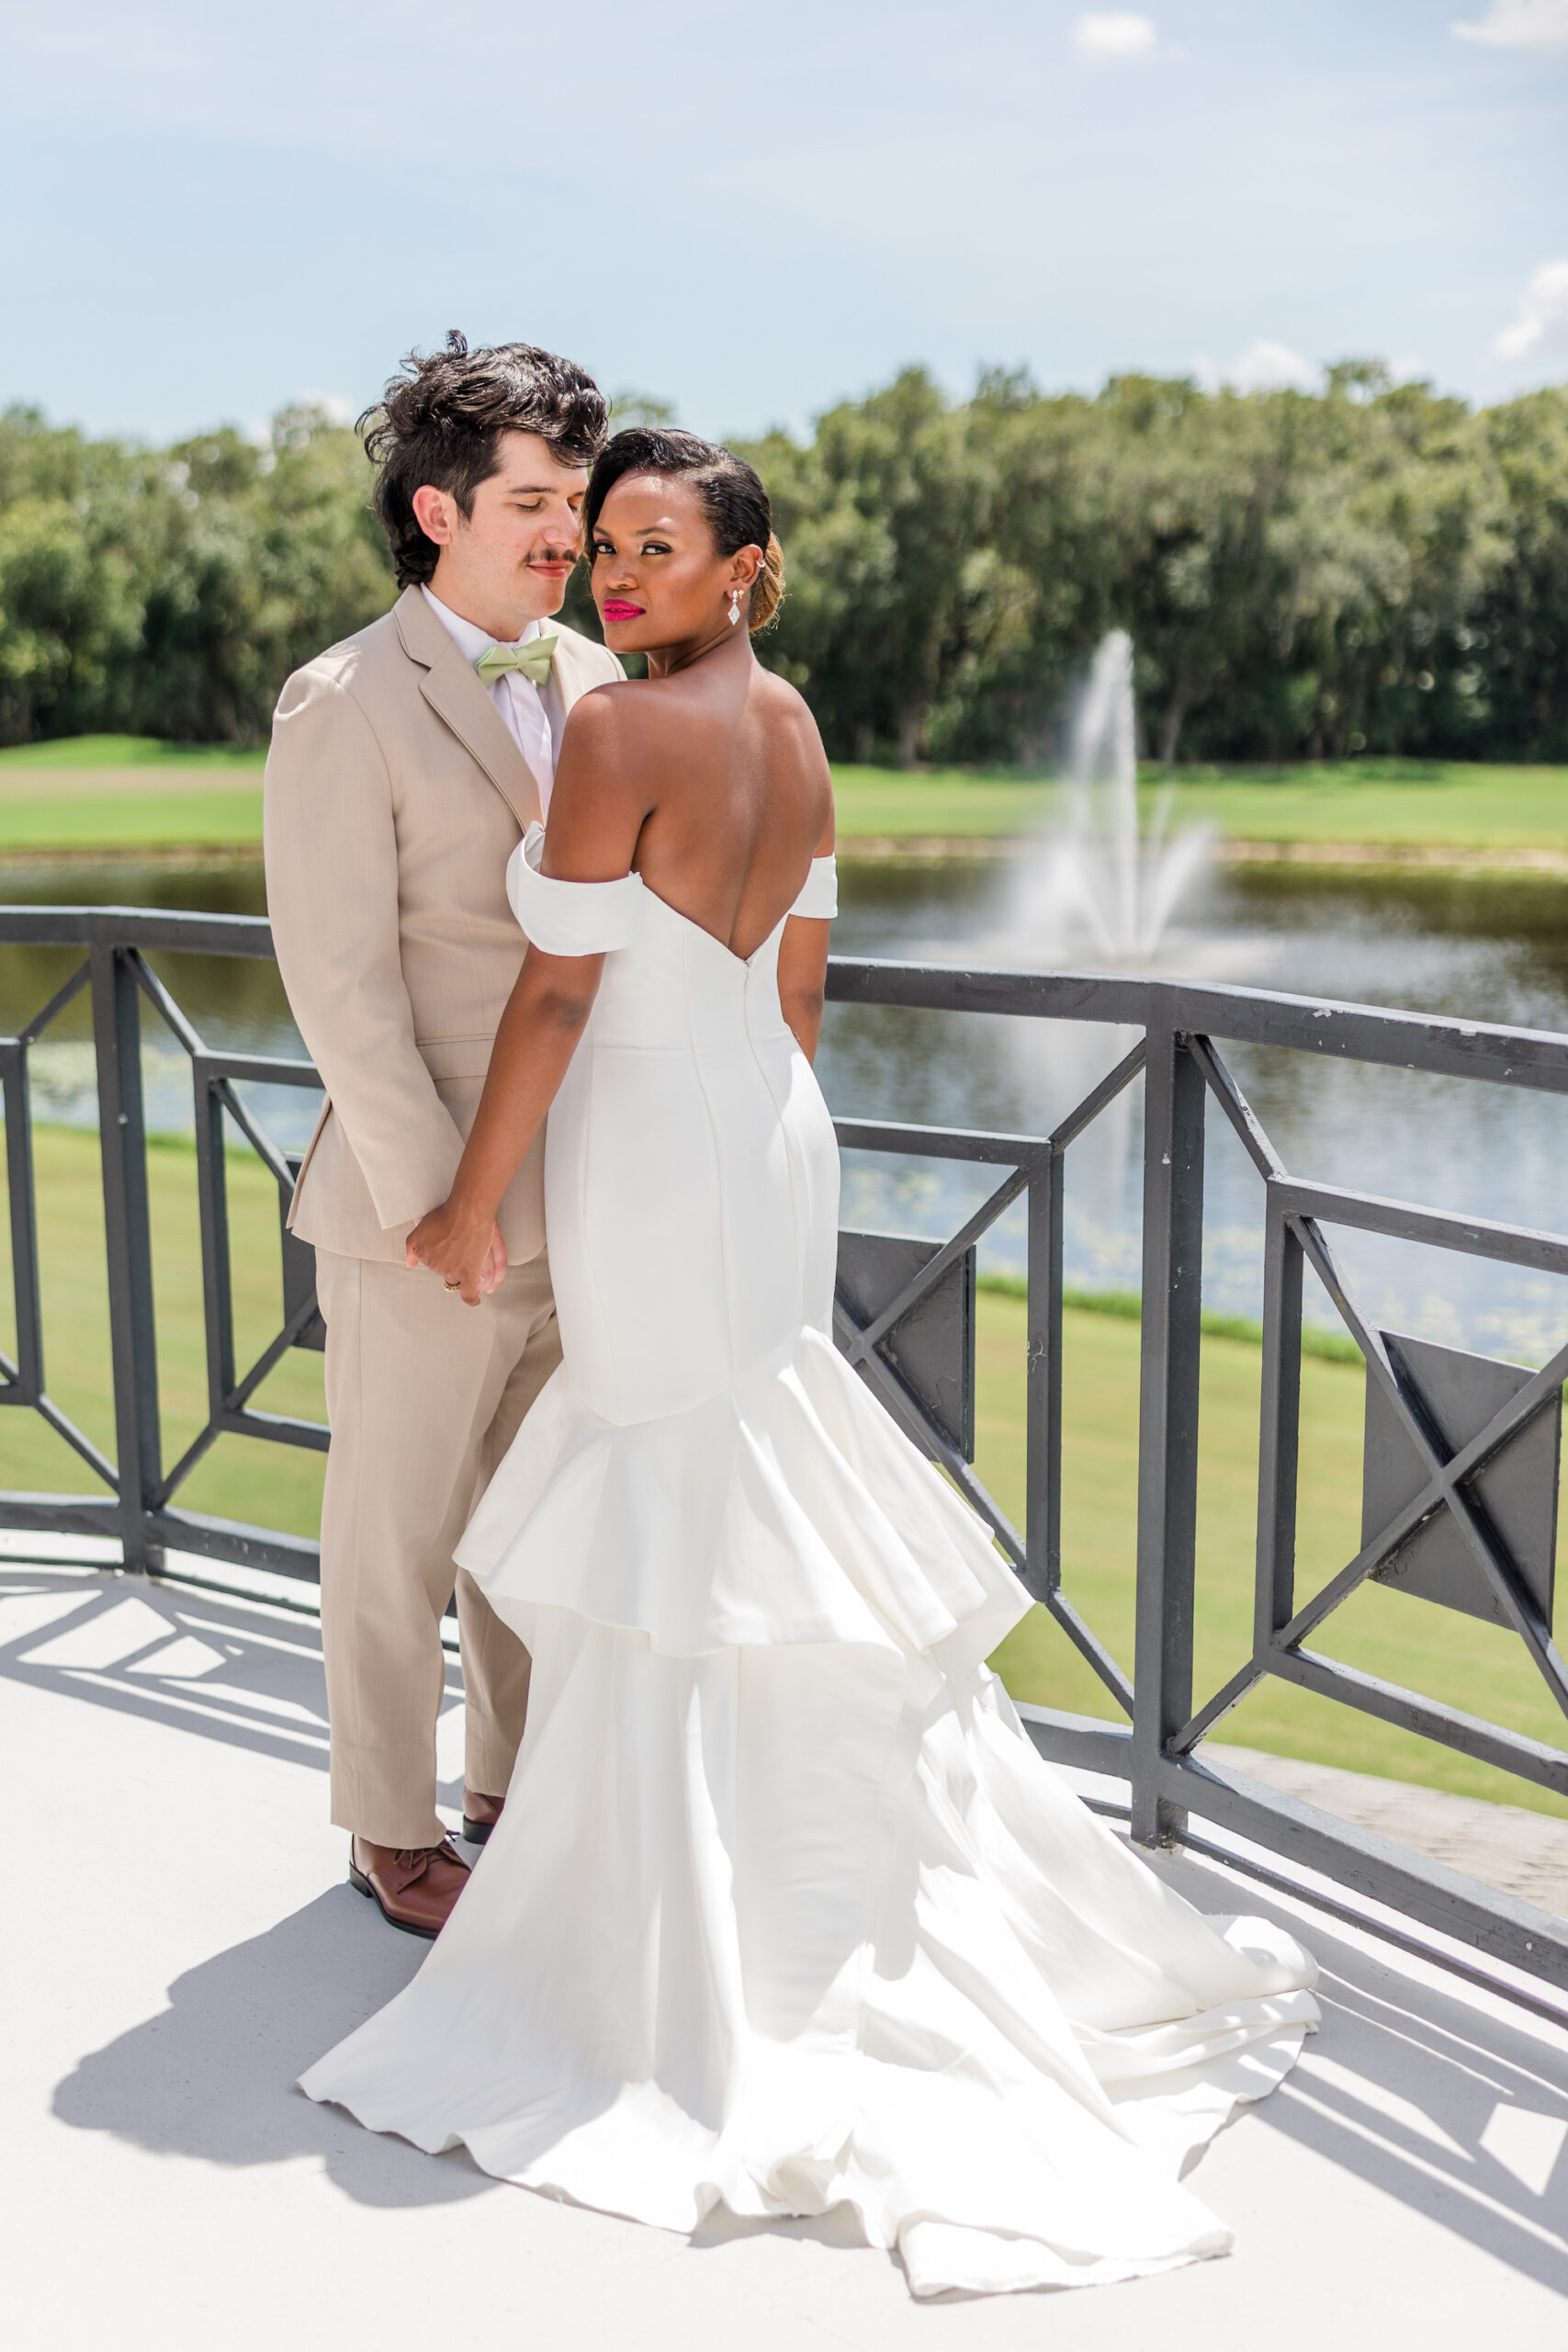 Bride and Groom Romantic Wedding Portrait | Tampa Bay Photographer Mary Anna Photography | Tampa Bay Wedding Attire Truly Forever Bridal | Hair and Makeup Artist Michele Renee The Studio | Planner Kelci Leigh Events